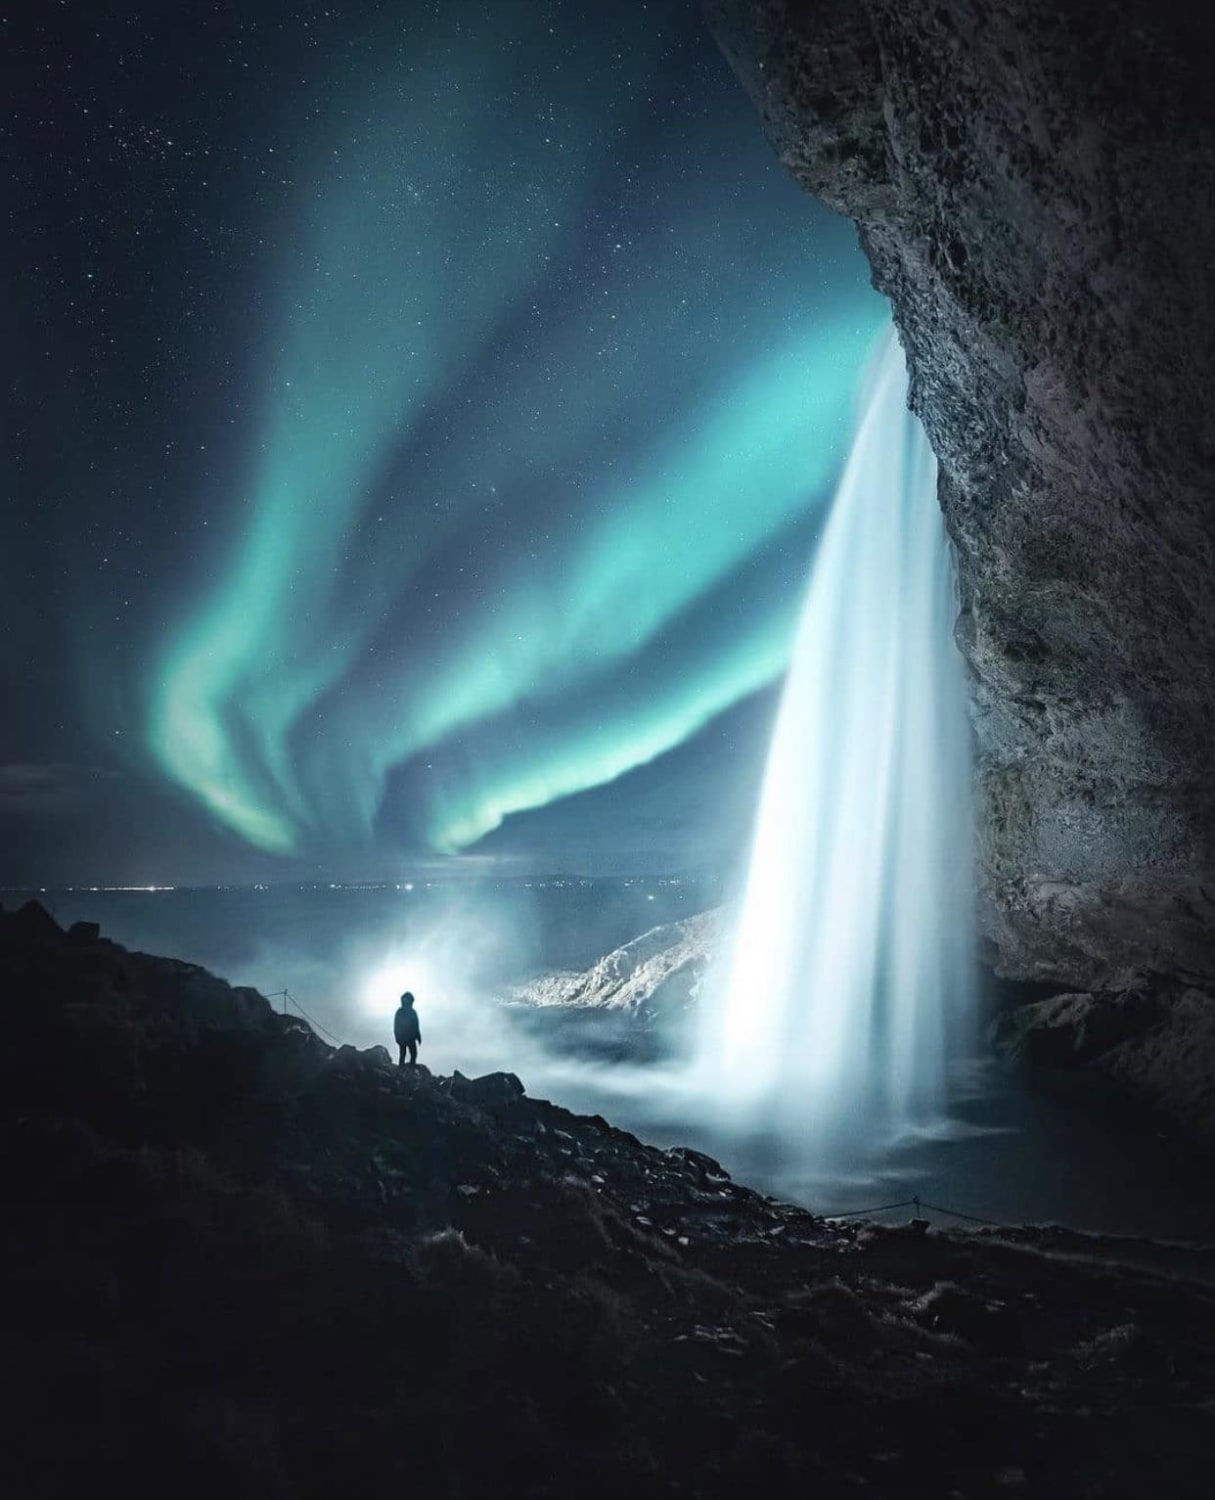 A beautiful wintry shot from Iceland! The waterfall definitely accentuates the Aurora.